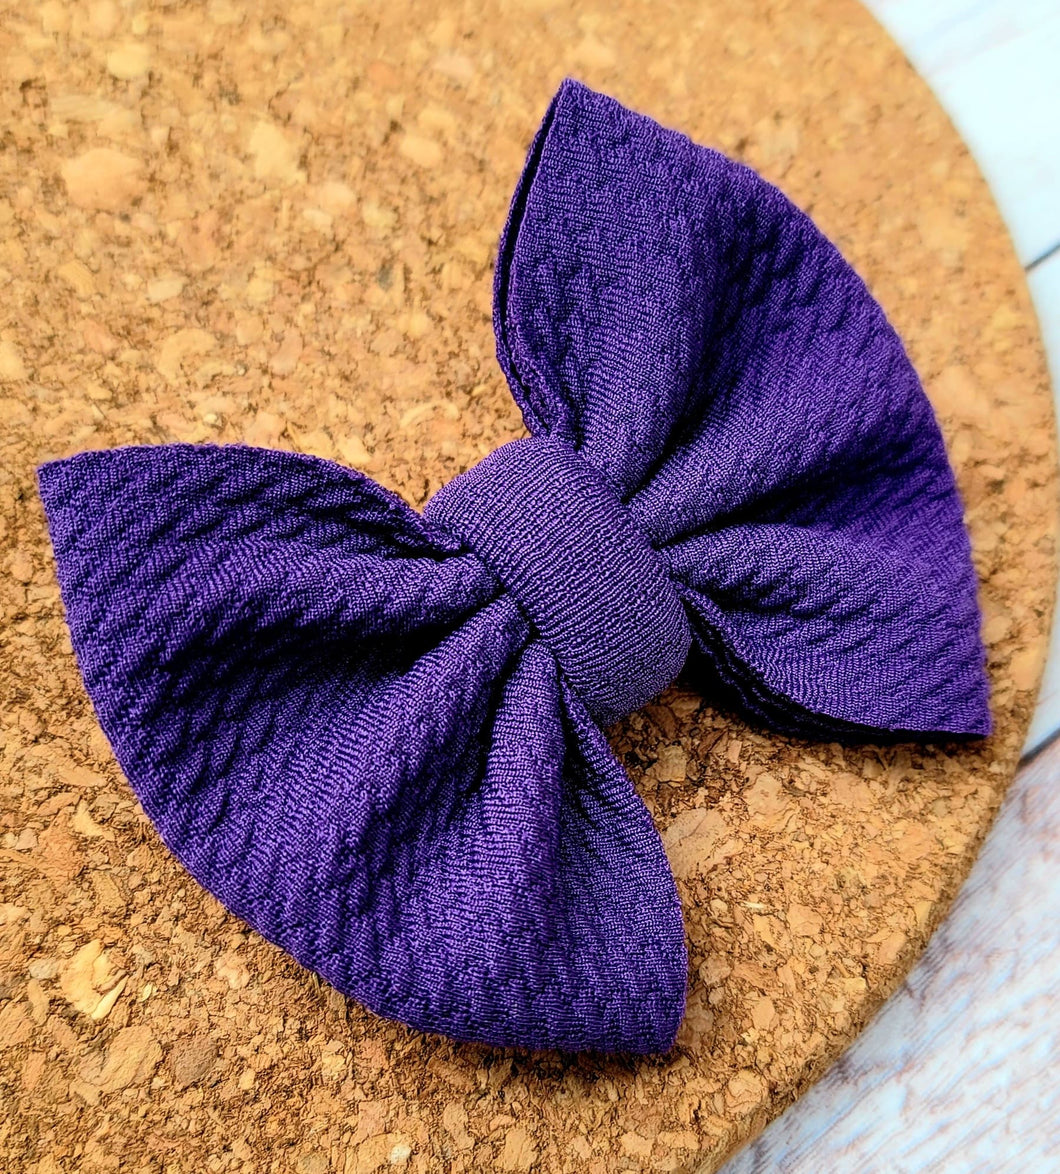 Purple BABY Size Solid Fabric Bow